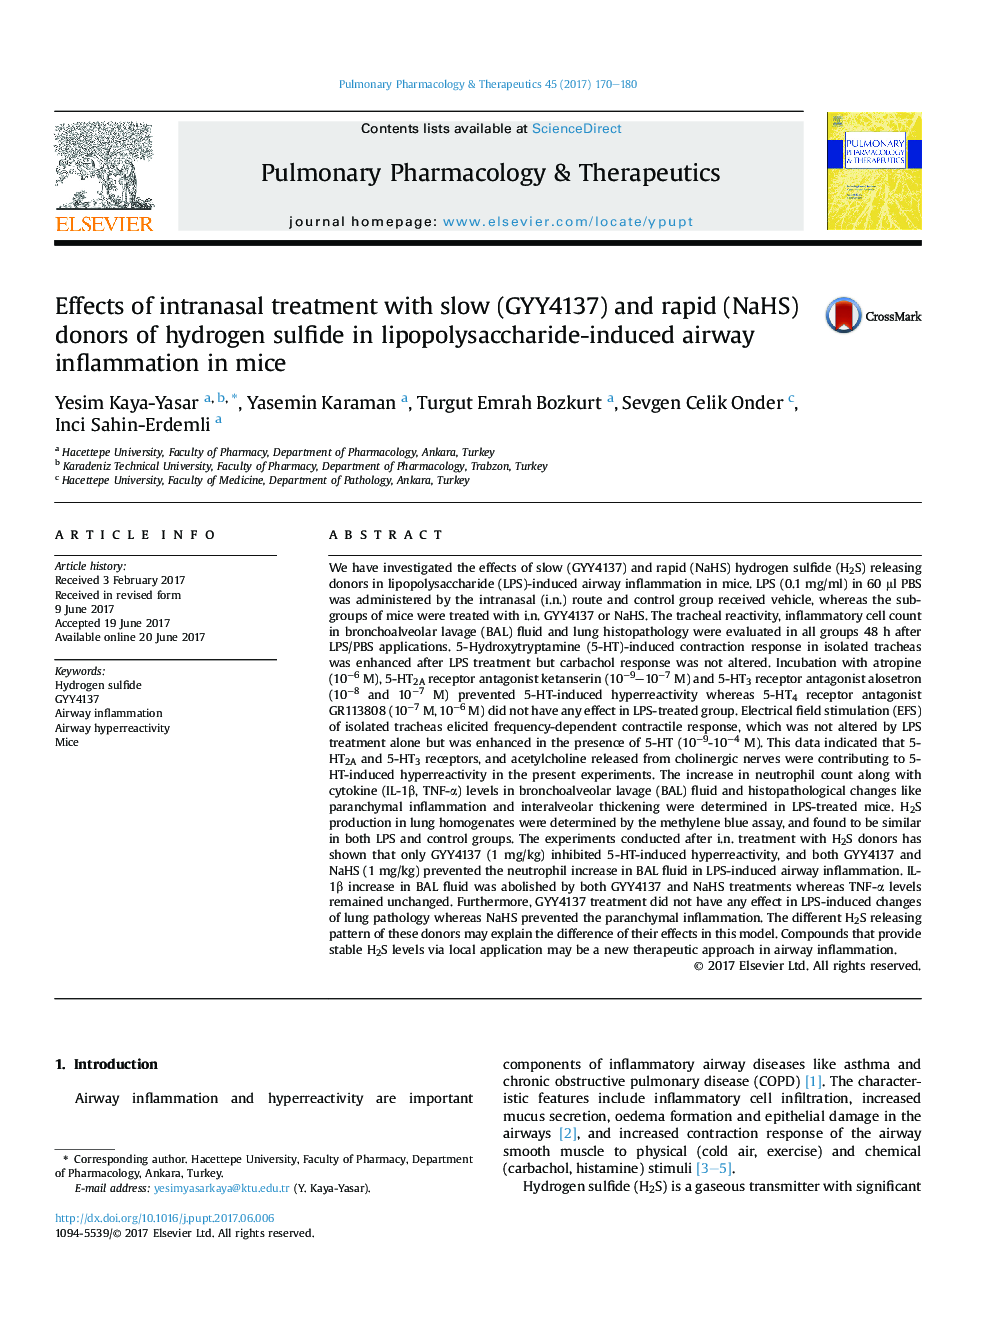 Effects of intranasal treatment with slow (GYY4137) and rapid (NaHS) donors of hydrogen sulfide in lipopolysaccharide-induced airway inflammation in mice